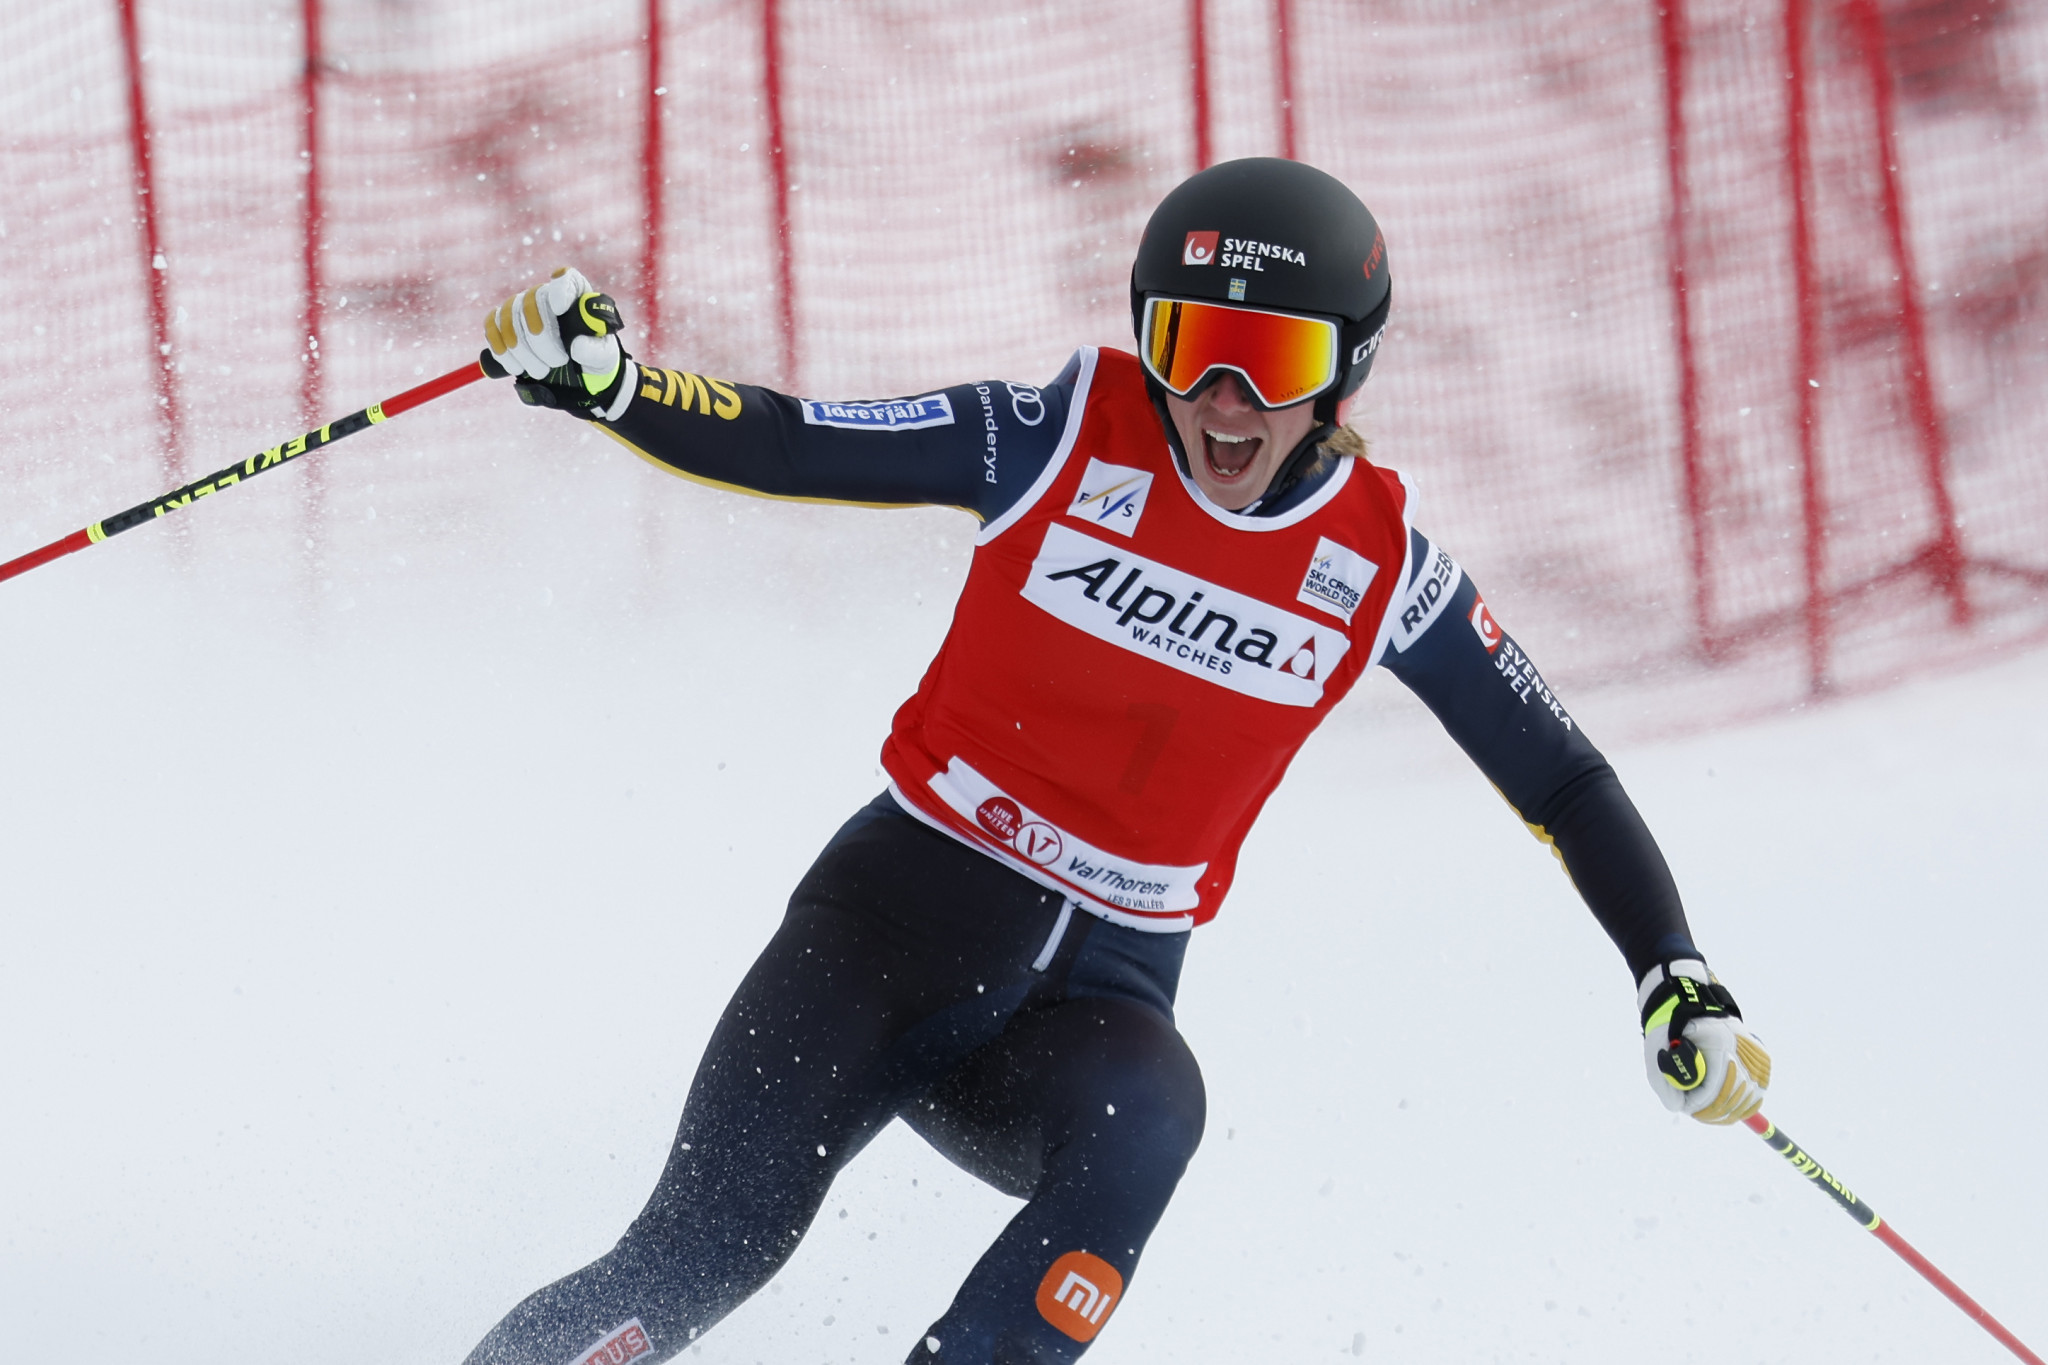 Naeslund and Mobärg do the double for Sweden at FIS Ski Cross World Cup